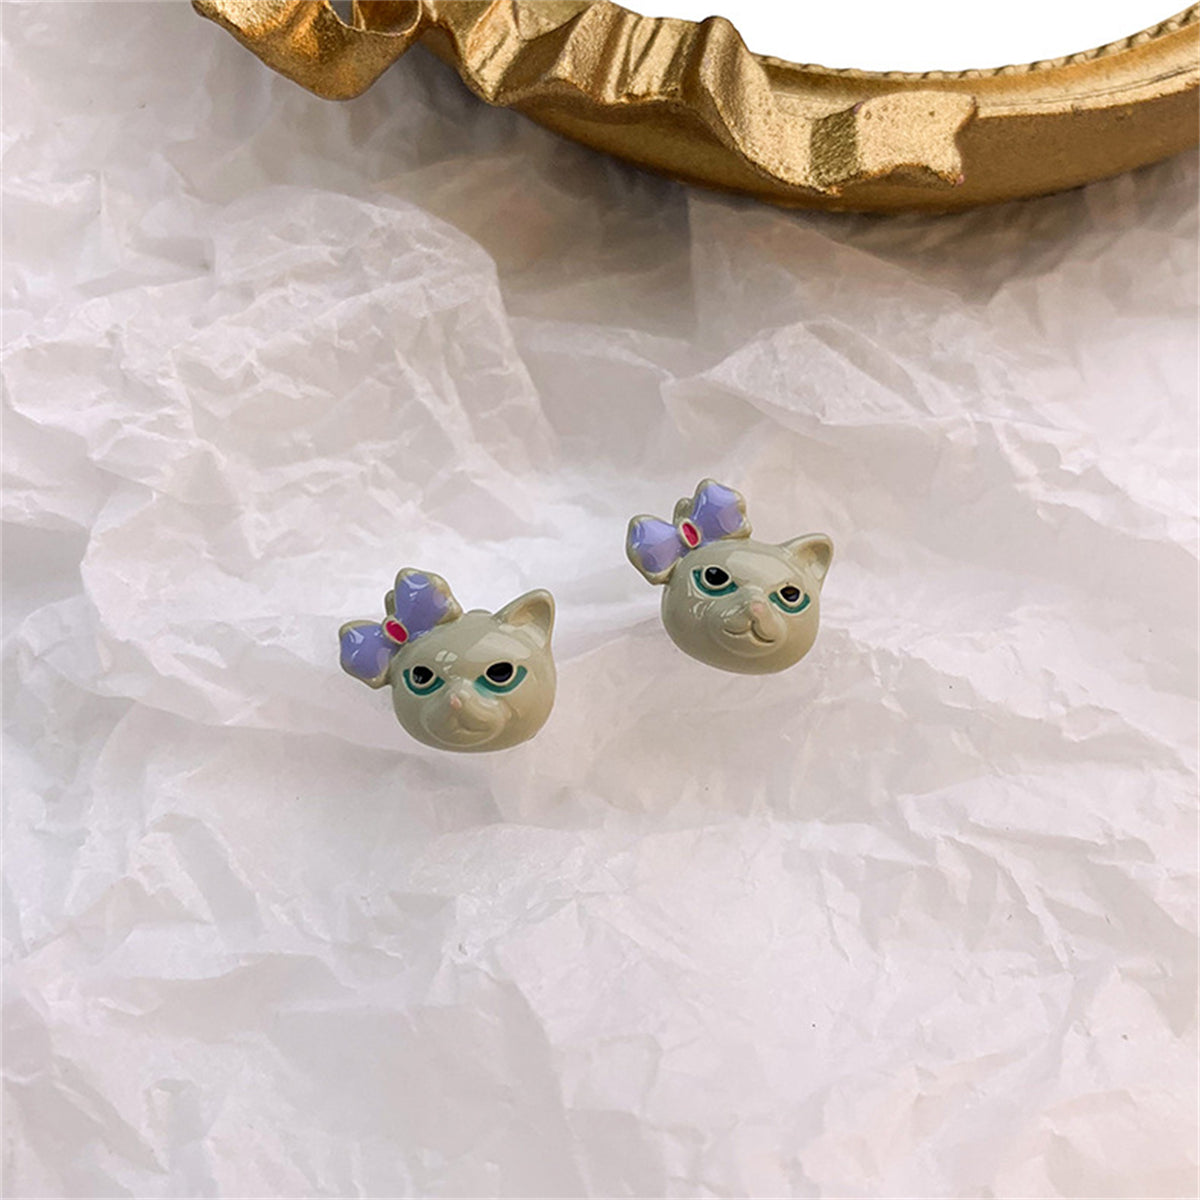 Gray & Silver-Plated Bow Kitty Stud Earrings